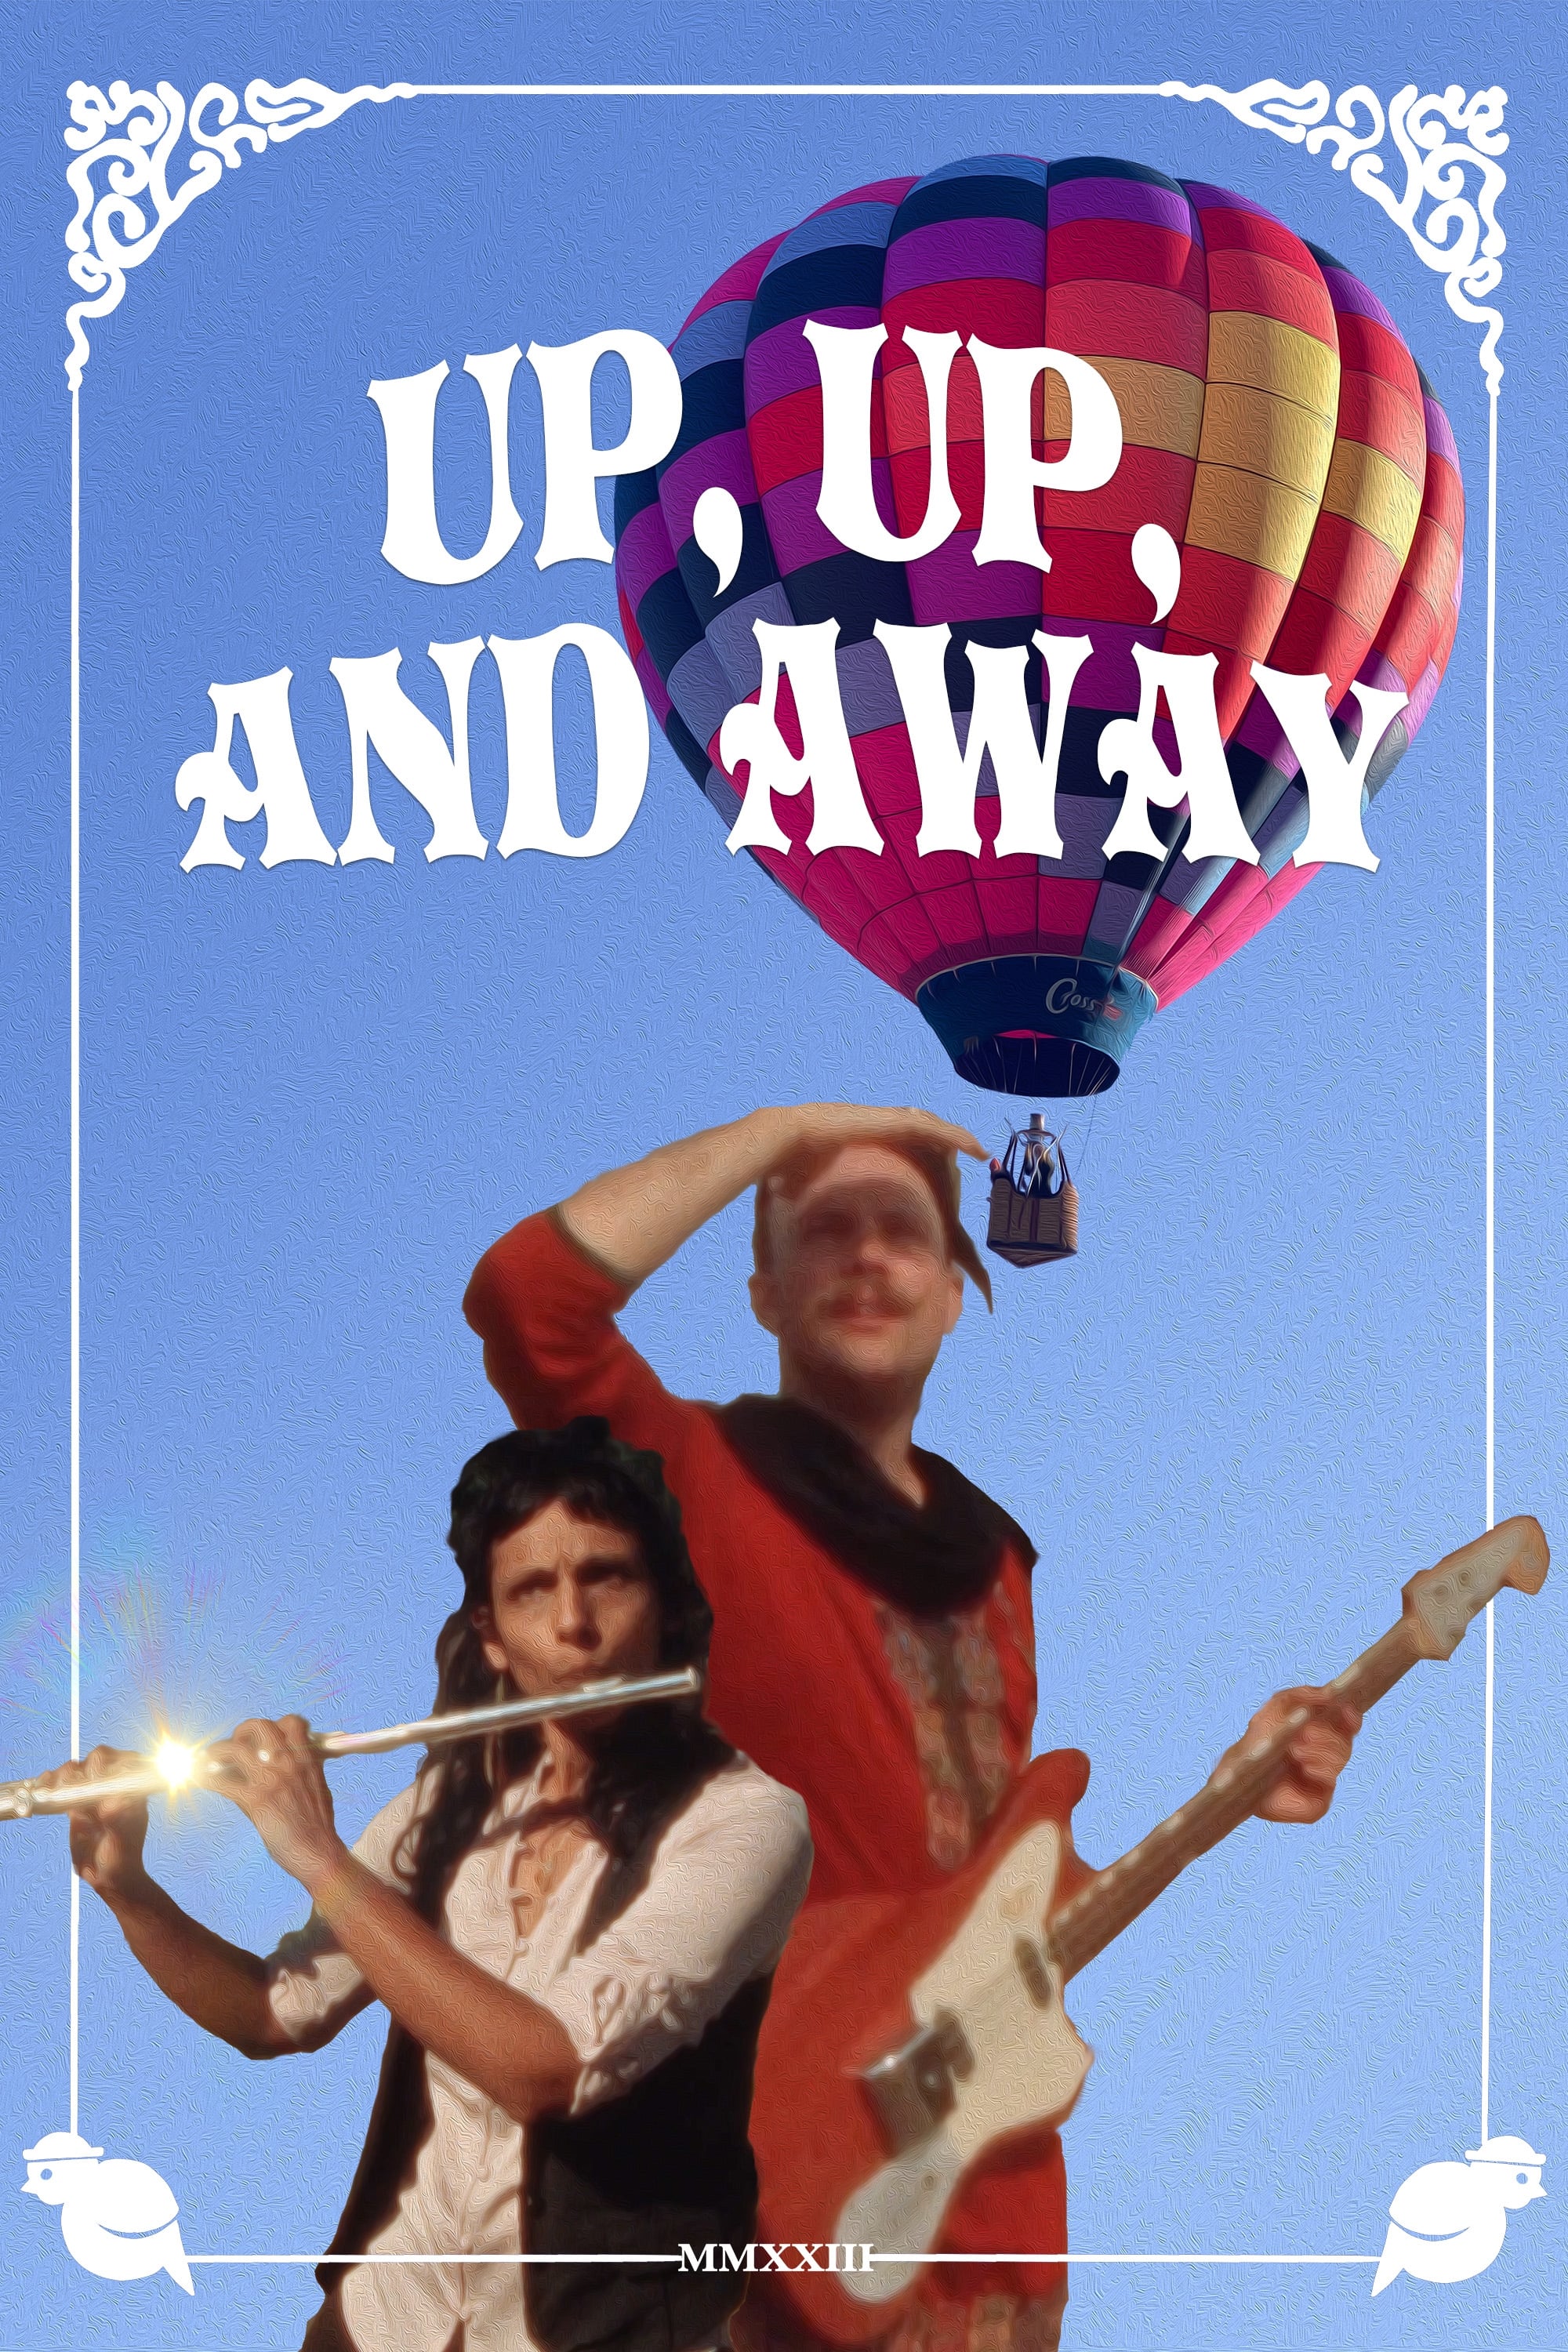 UP, UP, AND AWAY